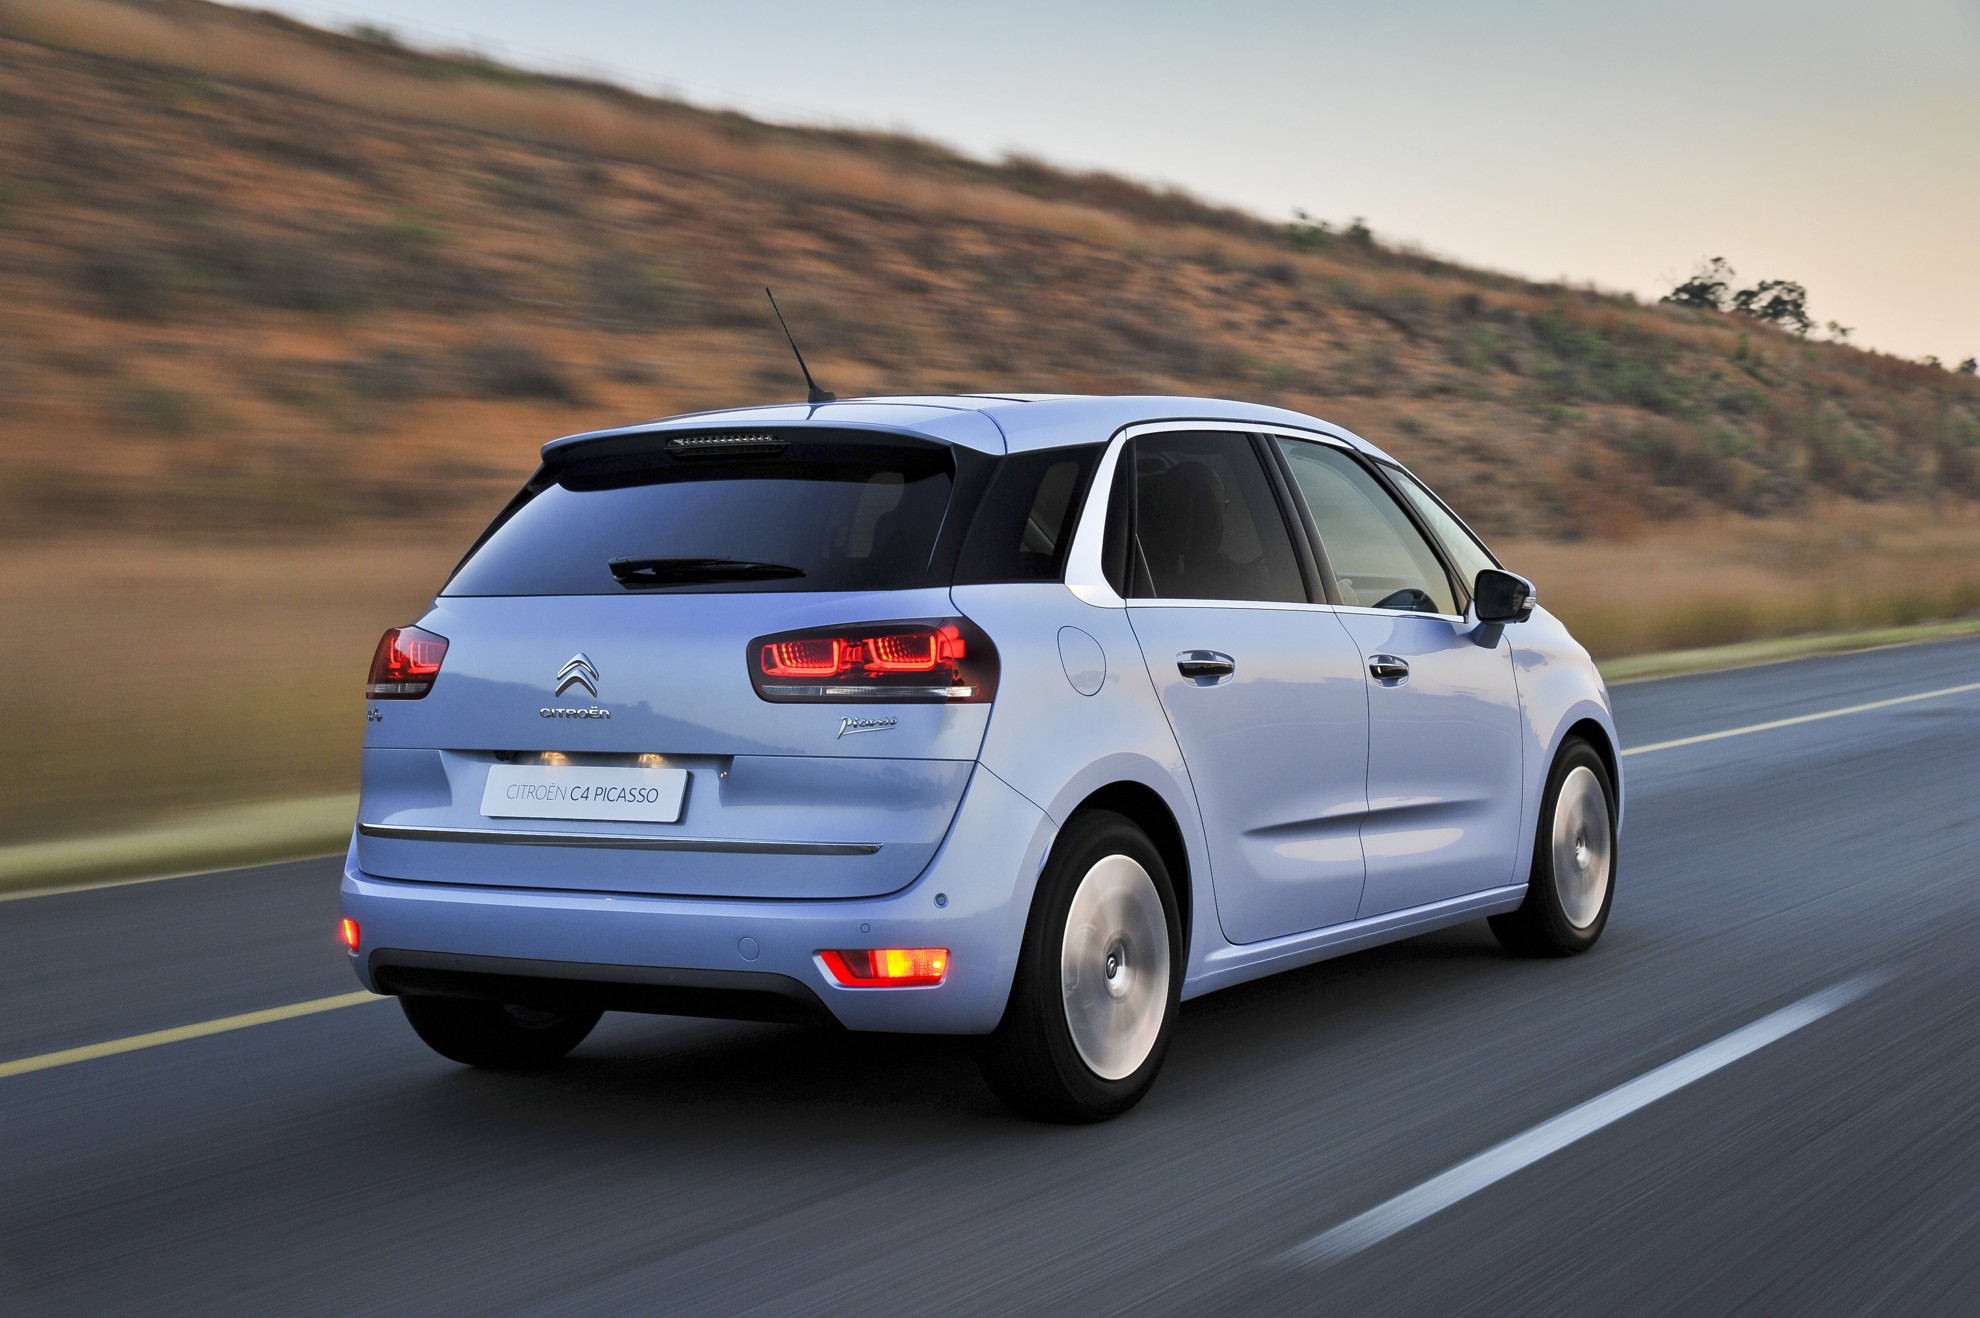 Citroën C4 PICASSO MPV Good Looking